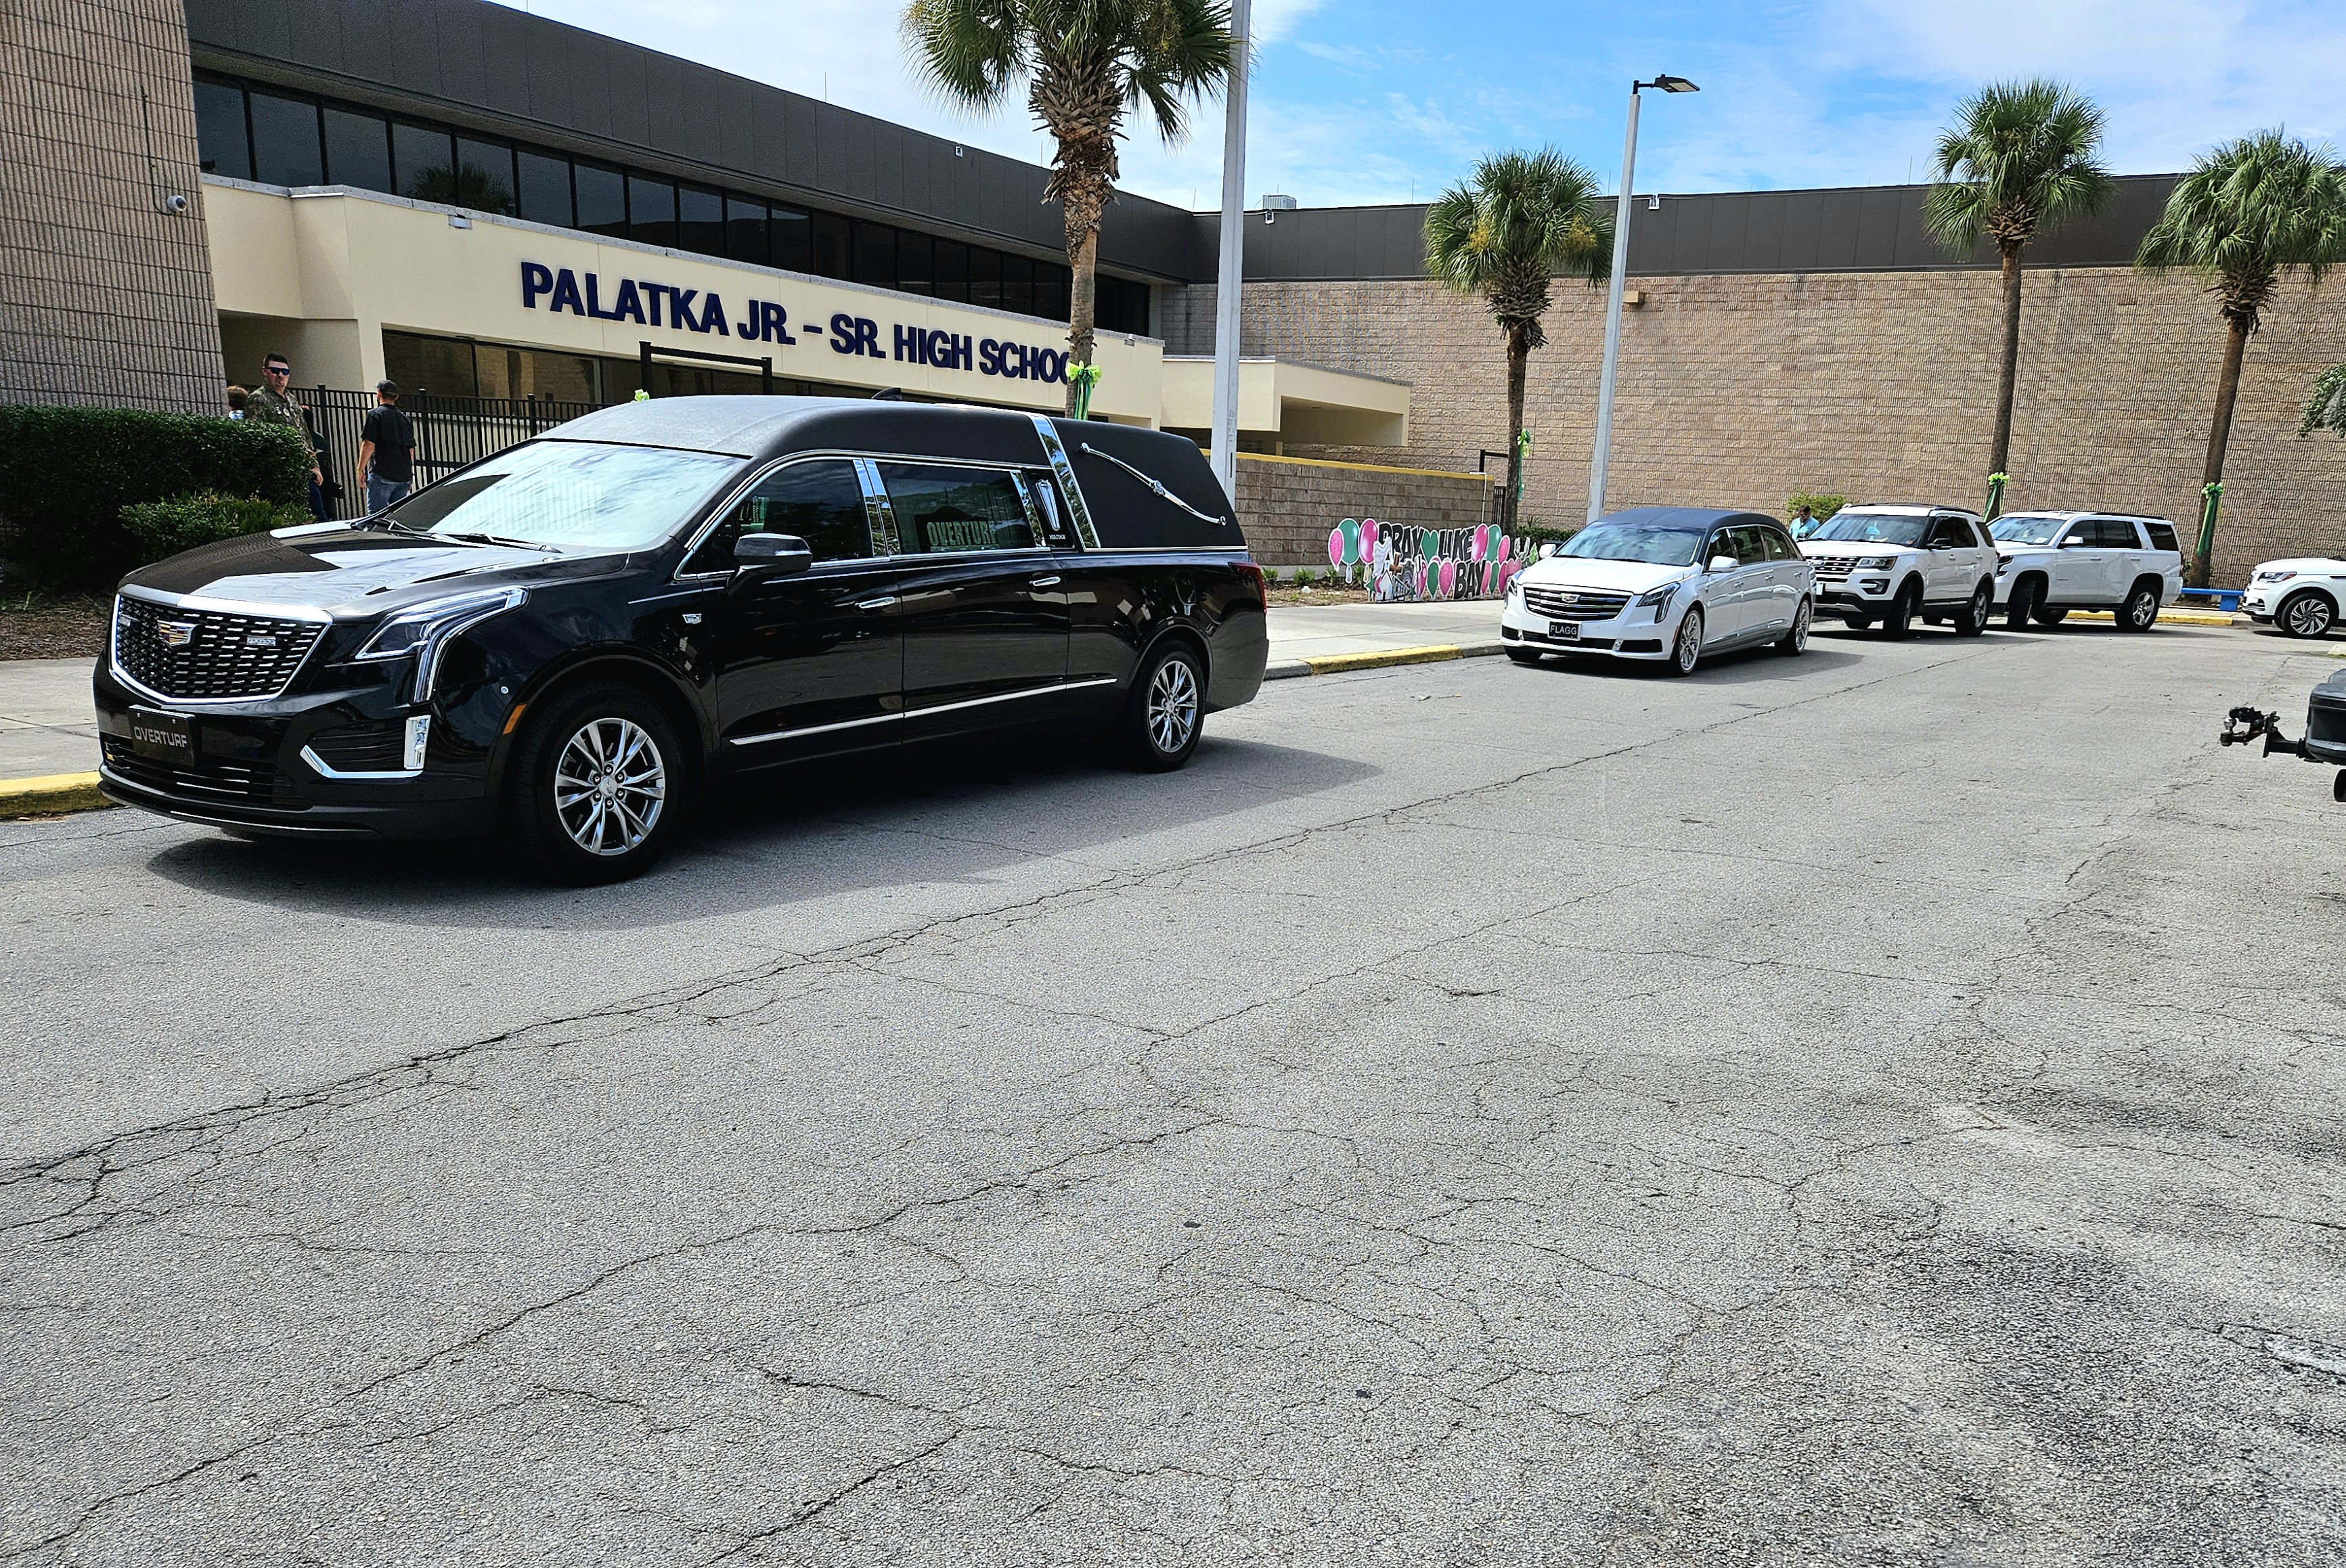 BRANDON D. OLIVER/Palatka Daily News – Funeral home vehicles are lined up outside Palatka Junior-Senior High School on Saturday.